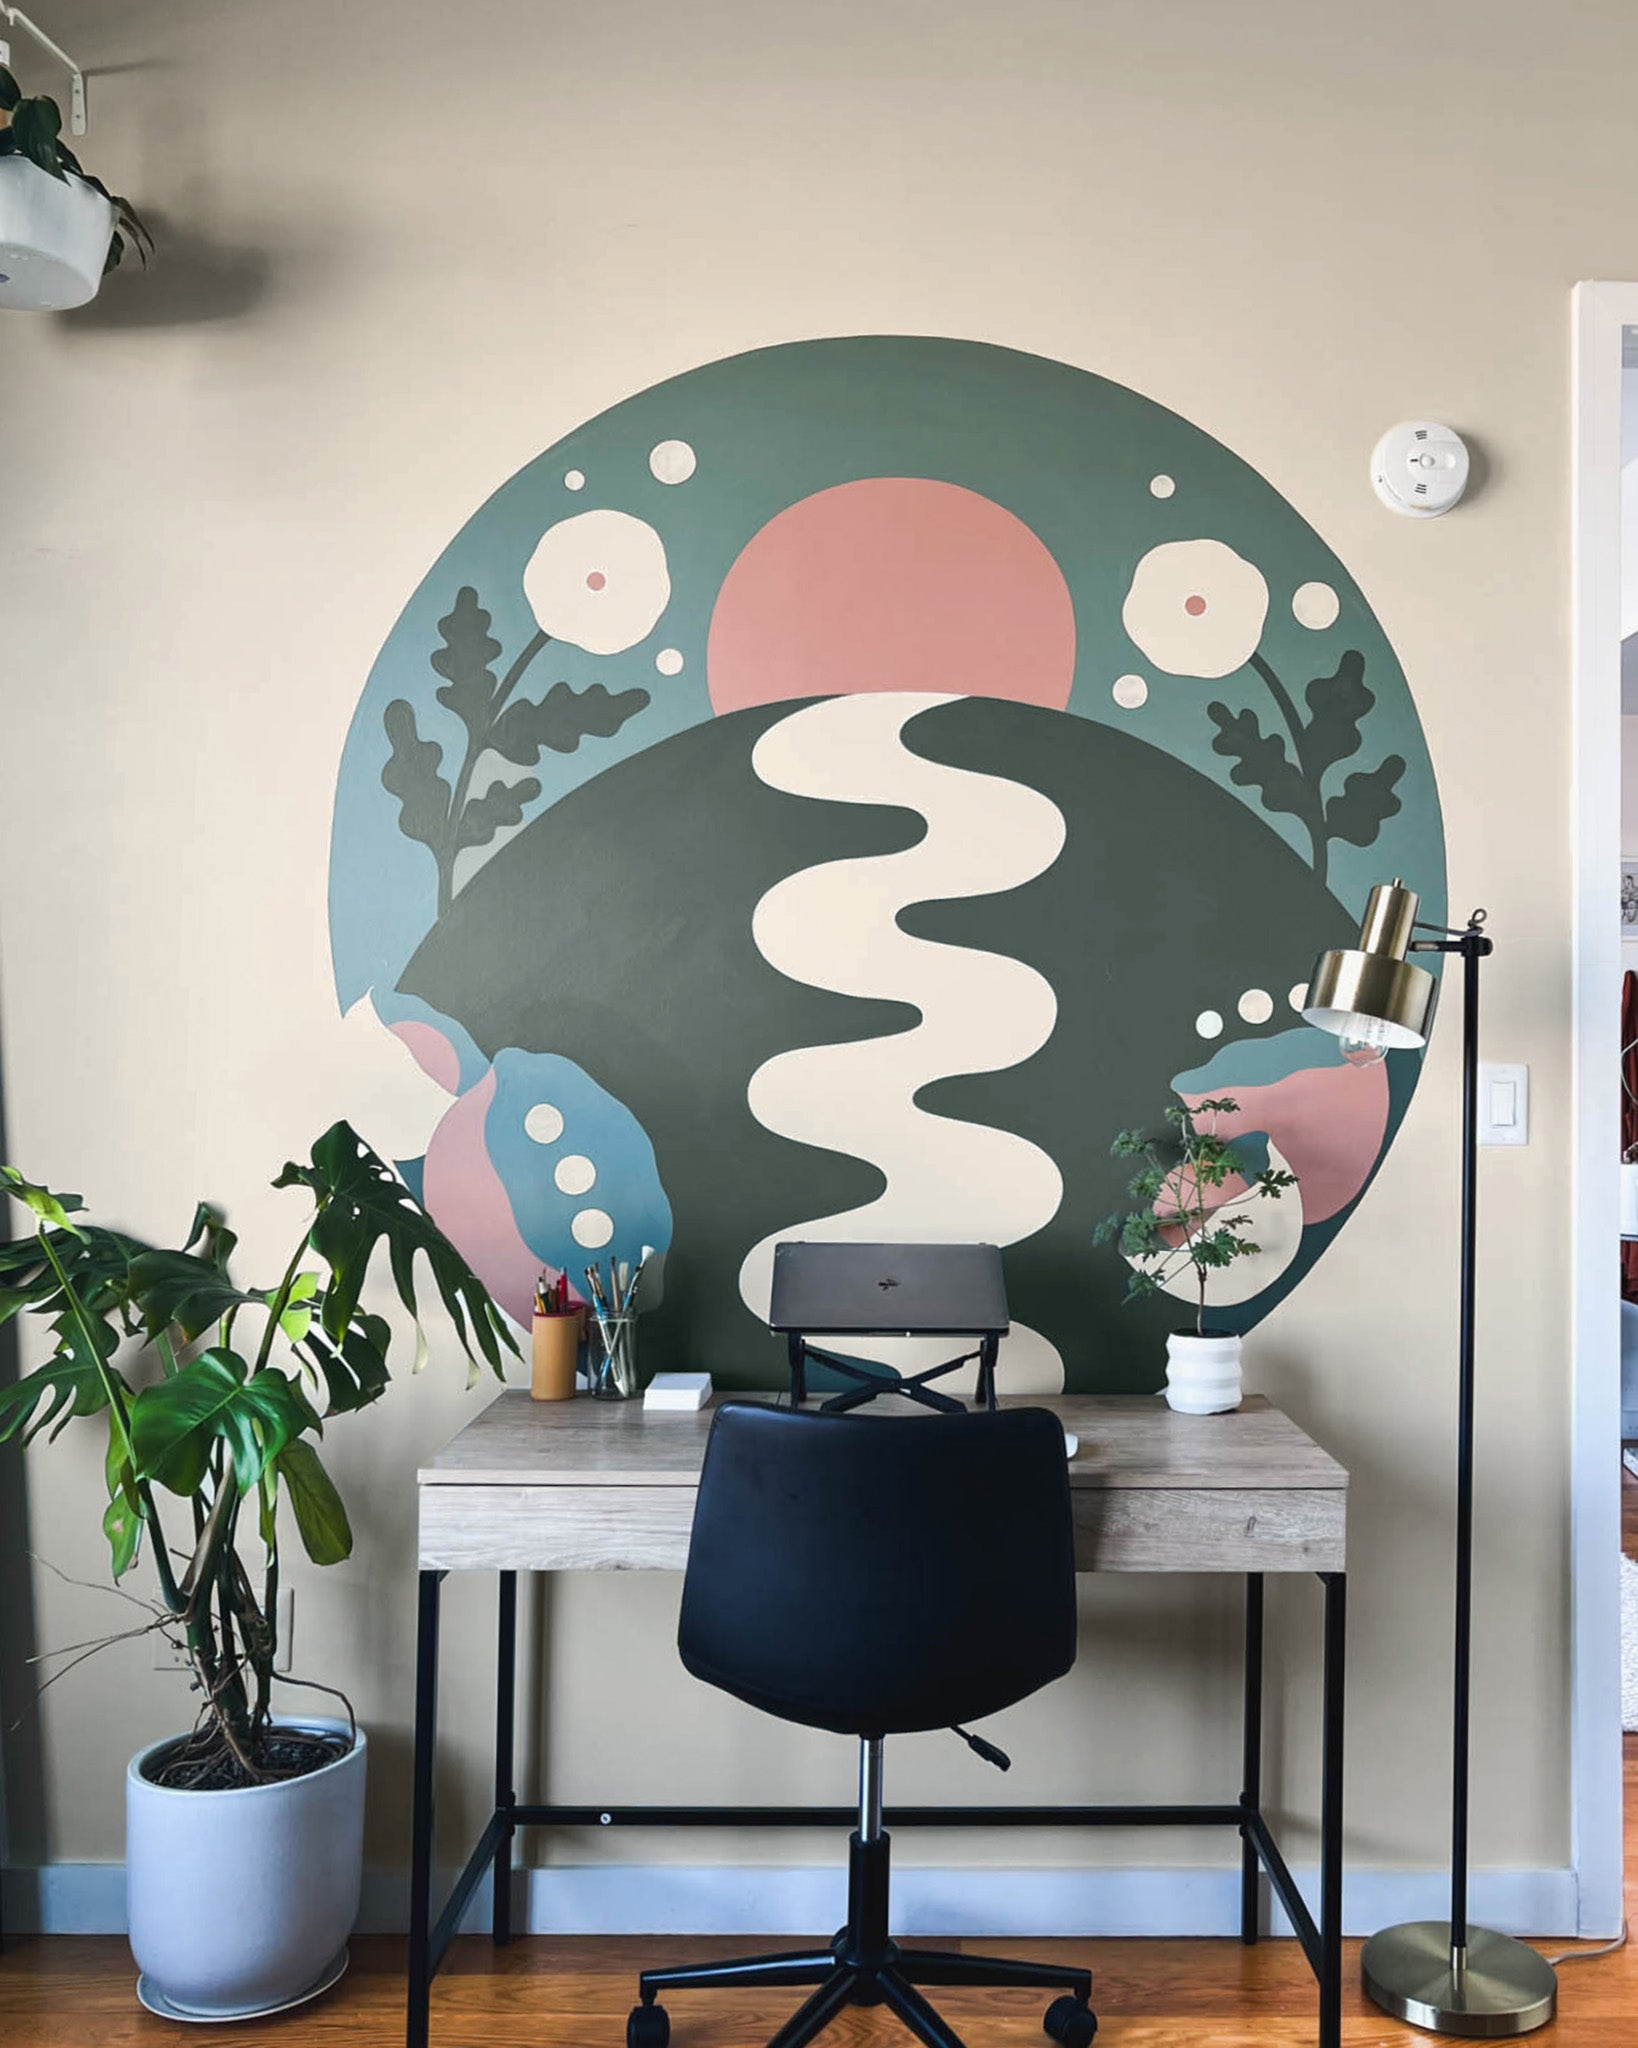 Home office mural inspired by nature using Clare colors Mellow Mood, Current Mood, Subrosa and Like Buttah. See how Clare Collective ambassador Lauren Hom pulled this off on the Clare blog.